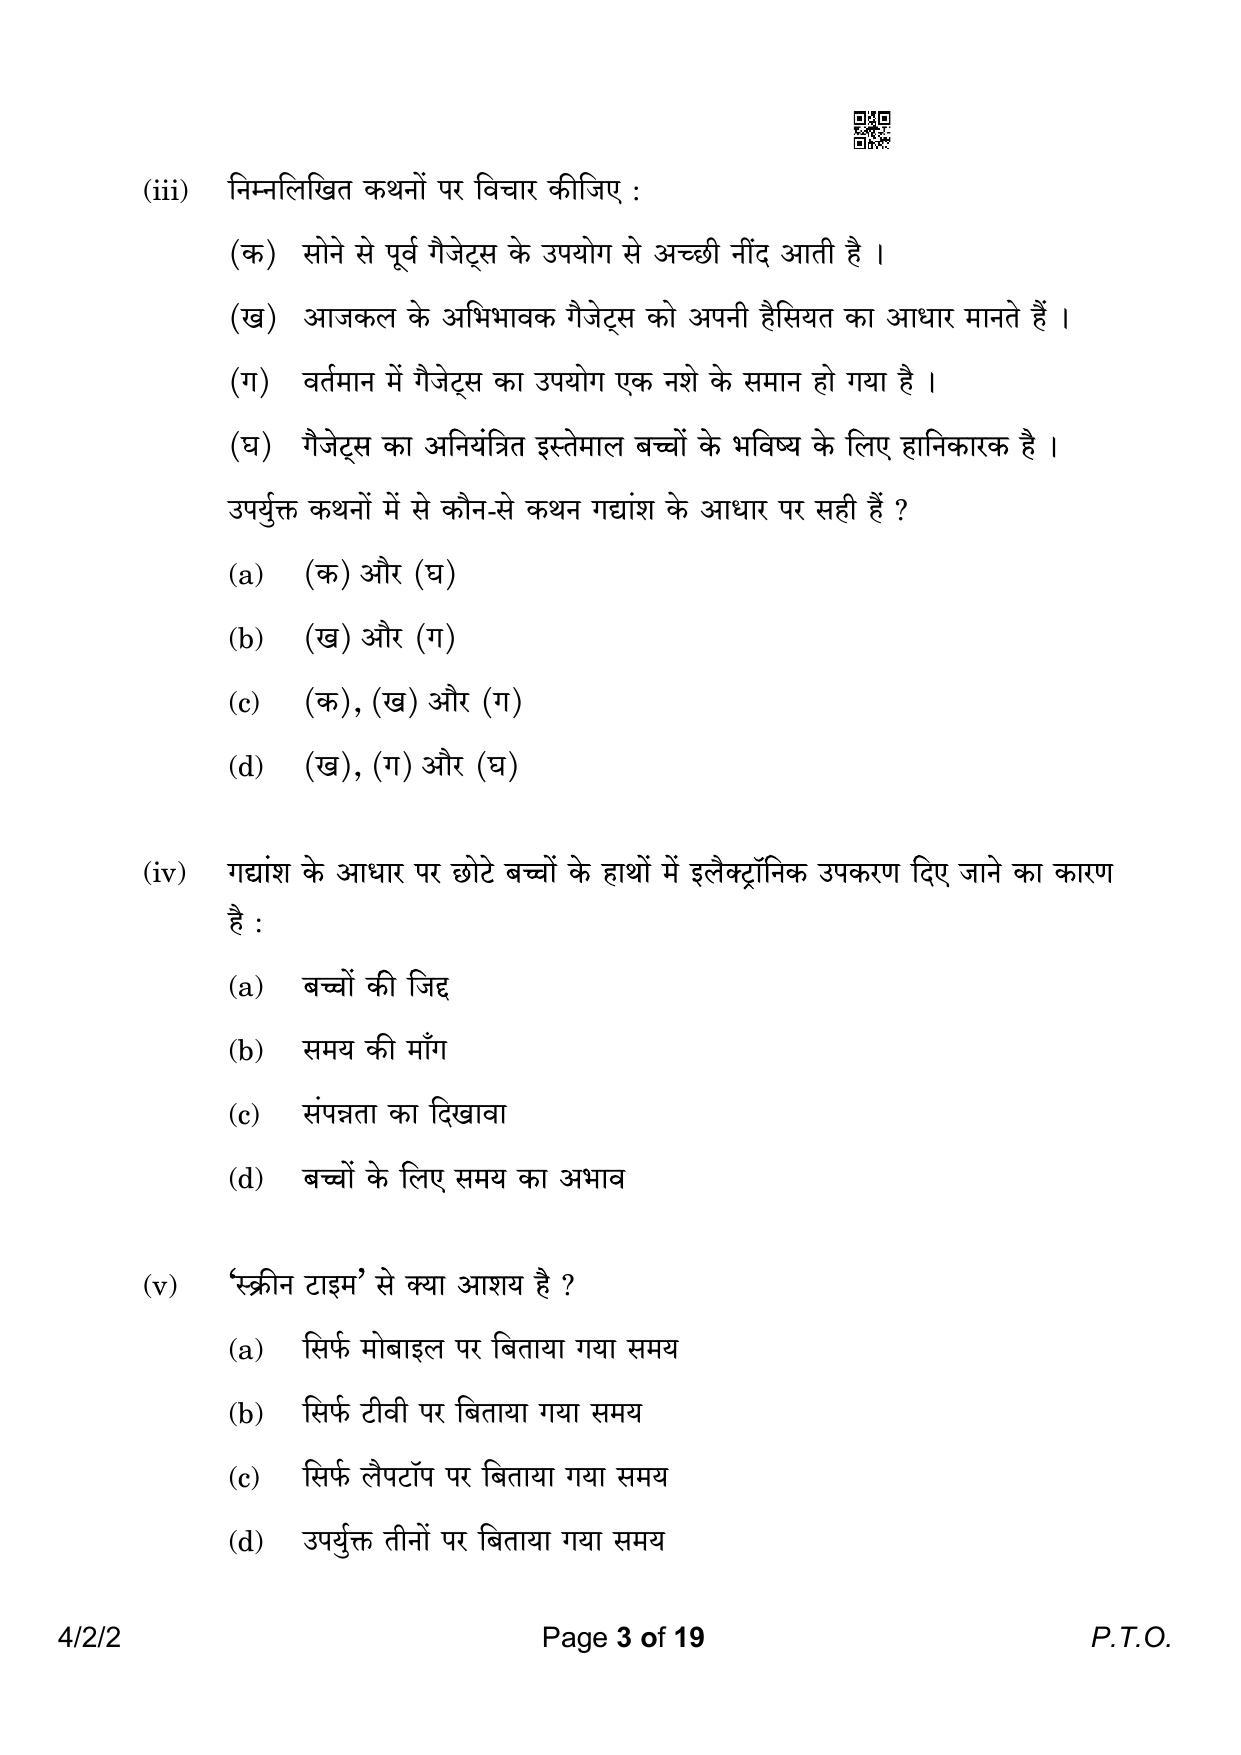 CBSE Class 10 4-2-2 Hindi B 2023 Question Paper - Page 3